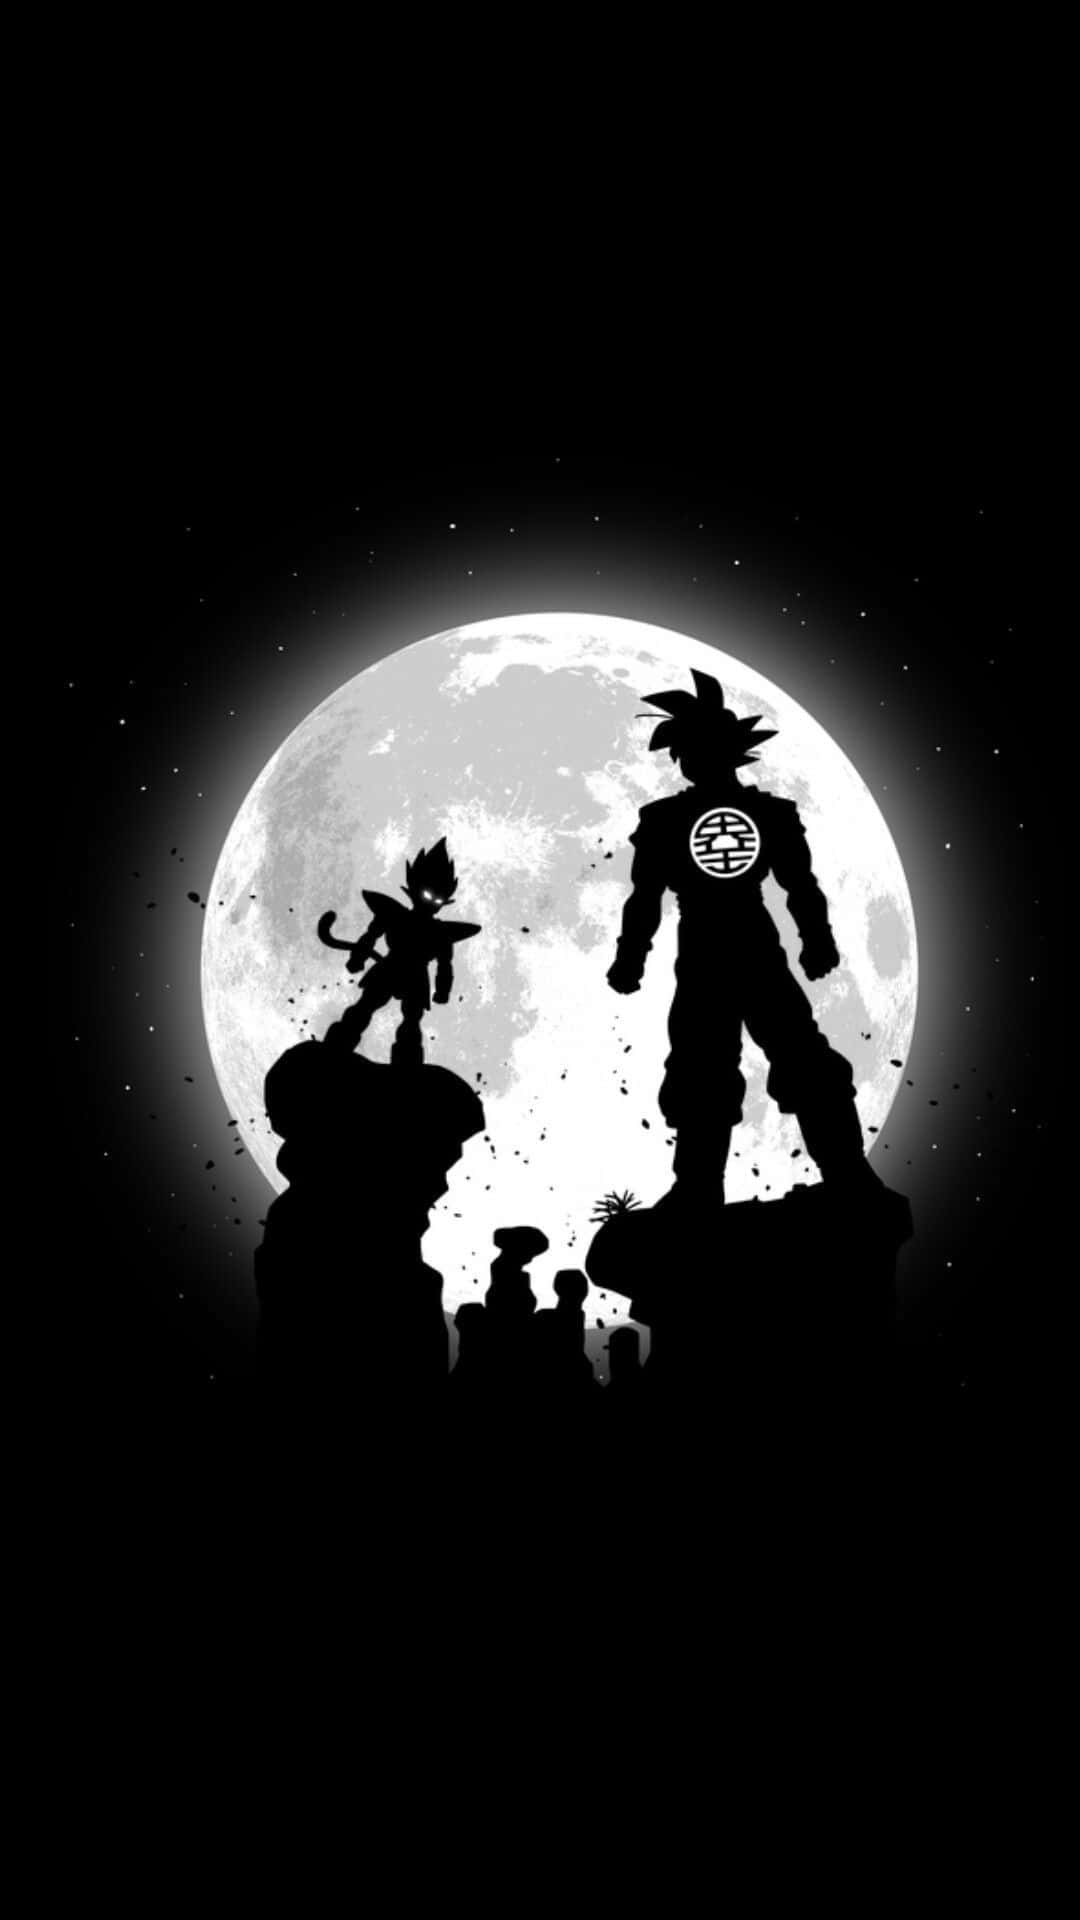 "The Power of Dragon Ball Black And White" Wallpaper